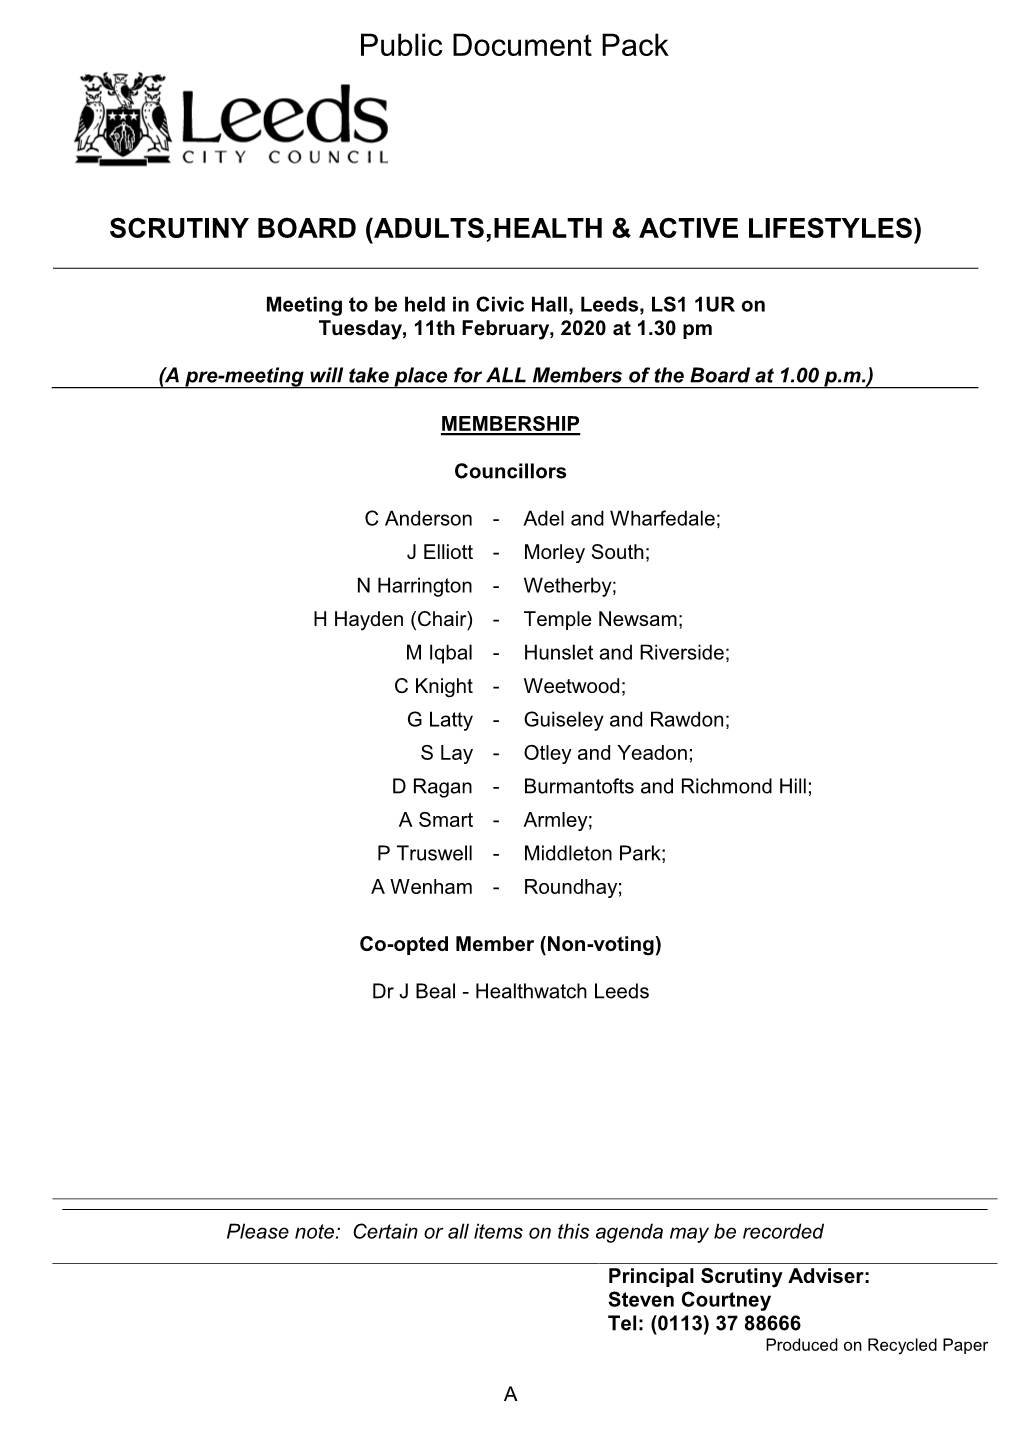 Scrutiny Board (Adults,Health & Active Lifestyles)